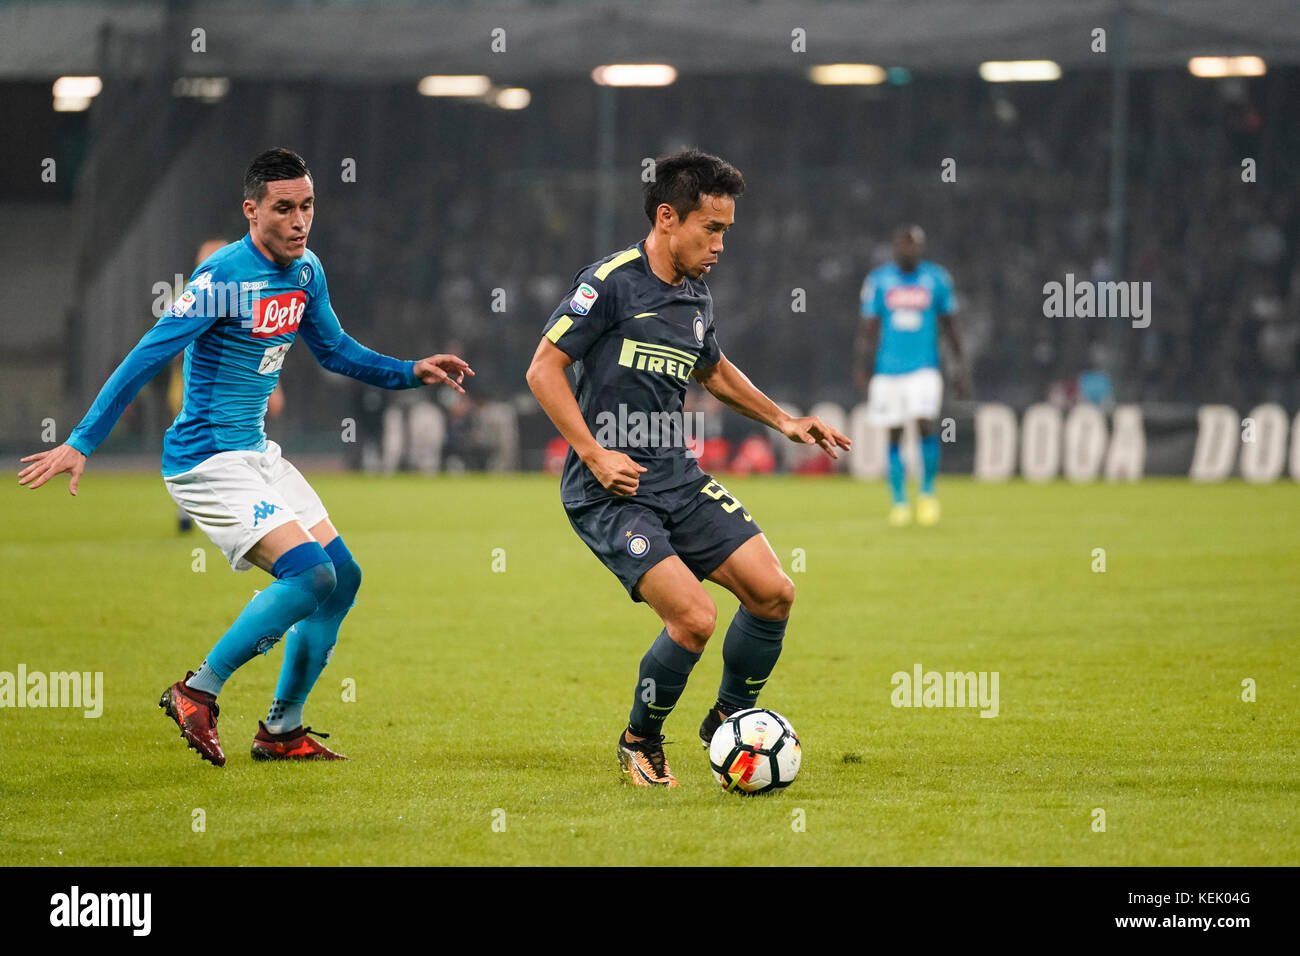 Napoli, Italy. 21st Oct, 2017. Naples - Italy 21/10/2017 JOSE MARIA CALLEJON of S.S.C. NAPOLI and of YUTO NAGATOMO Inter fights for the ball during Serie A match between S.S.C. NAPOLI and Inter at Stadio San Paolo of Naples. Credit: Emanuele Sessa/Pacific Press/Alamy Live News Stock Photo